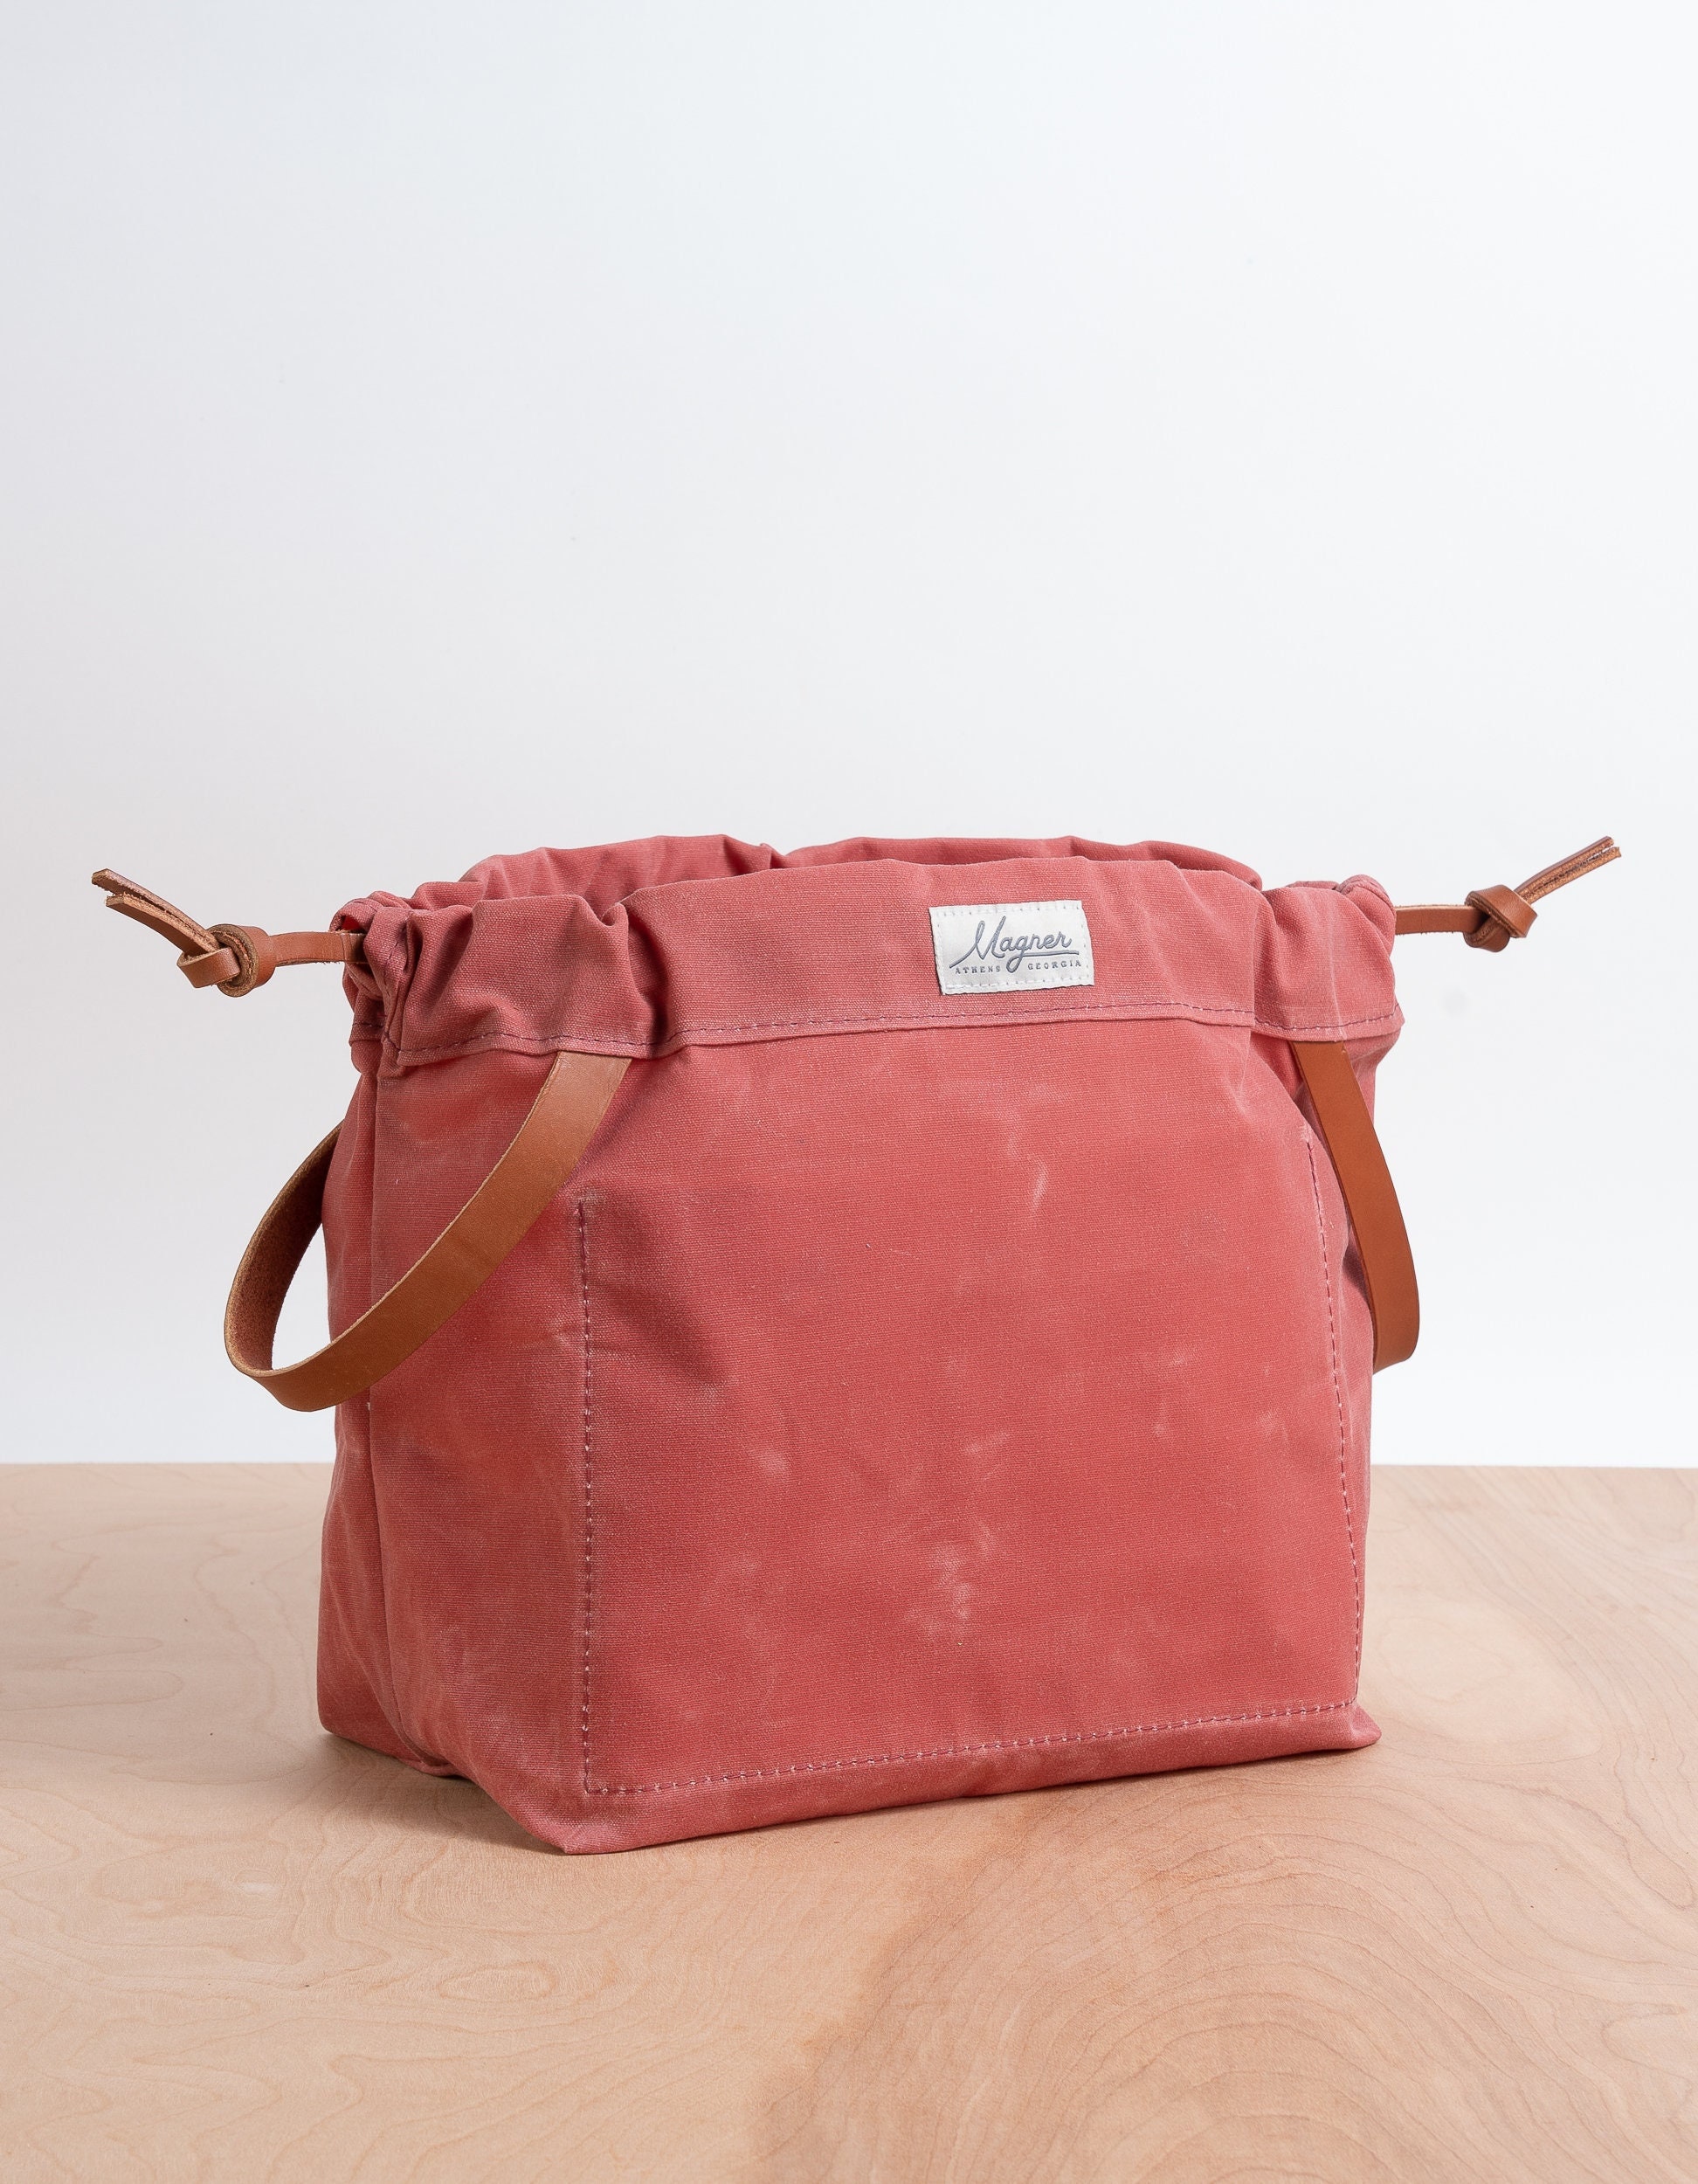 Magner Knitty Gritty Original Project Bag Red